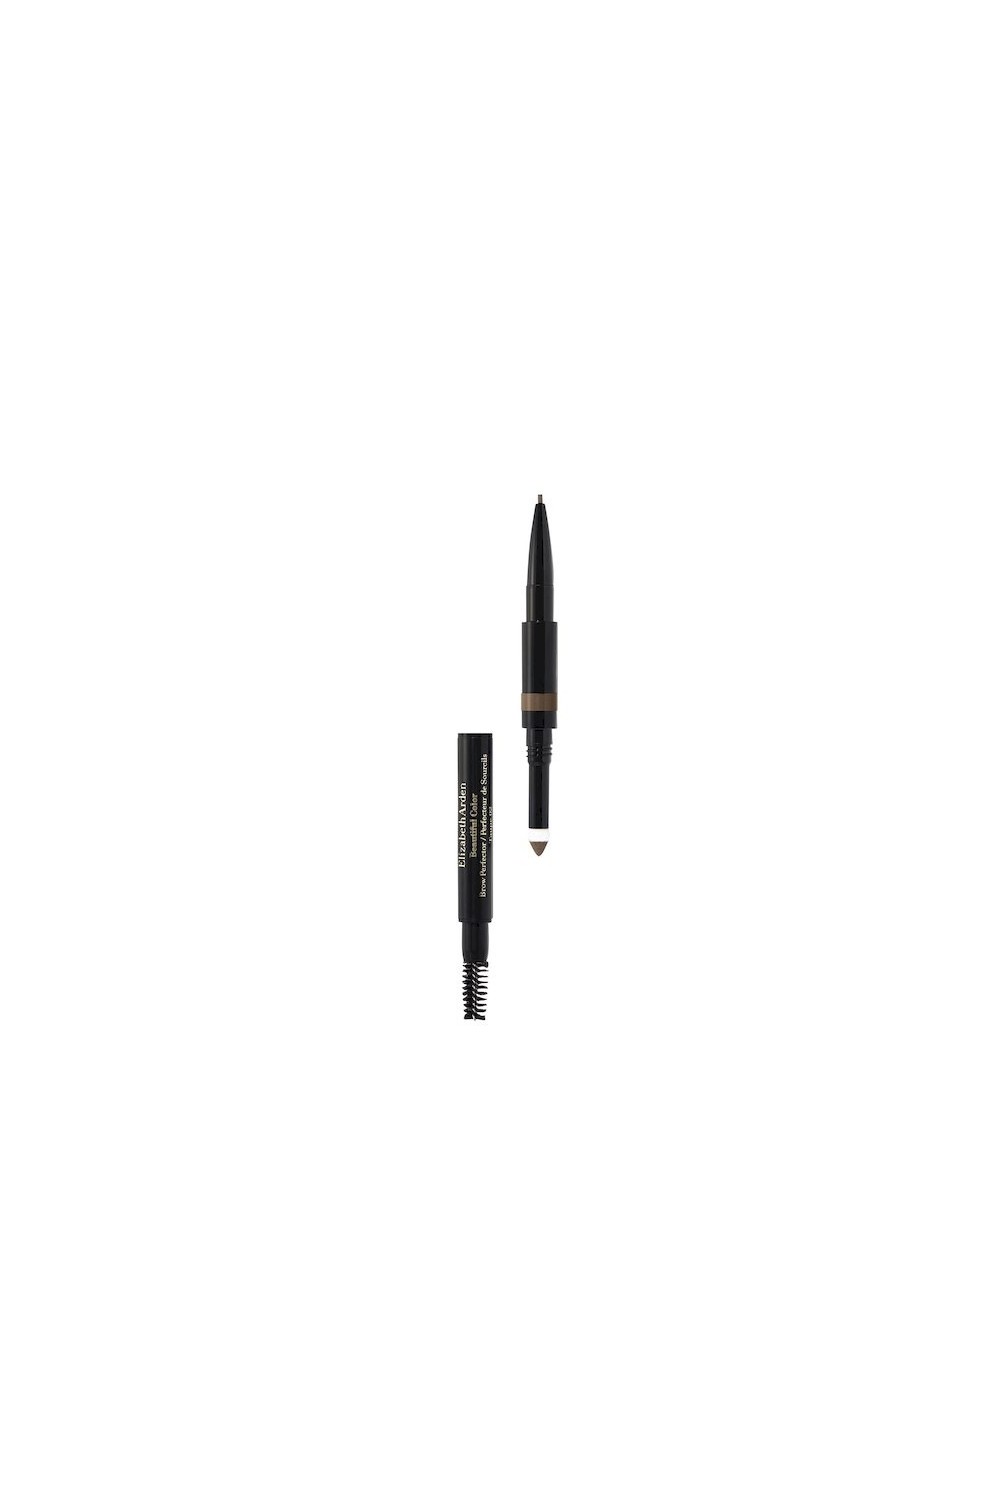 Elizabeth Arden Beautiful Color 3 In 1 Eye Brow 02 Taupe